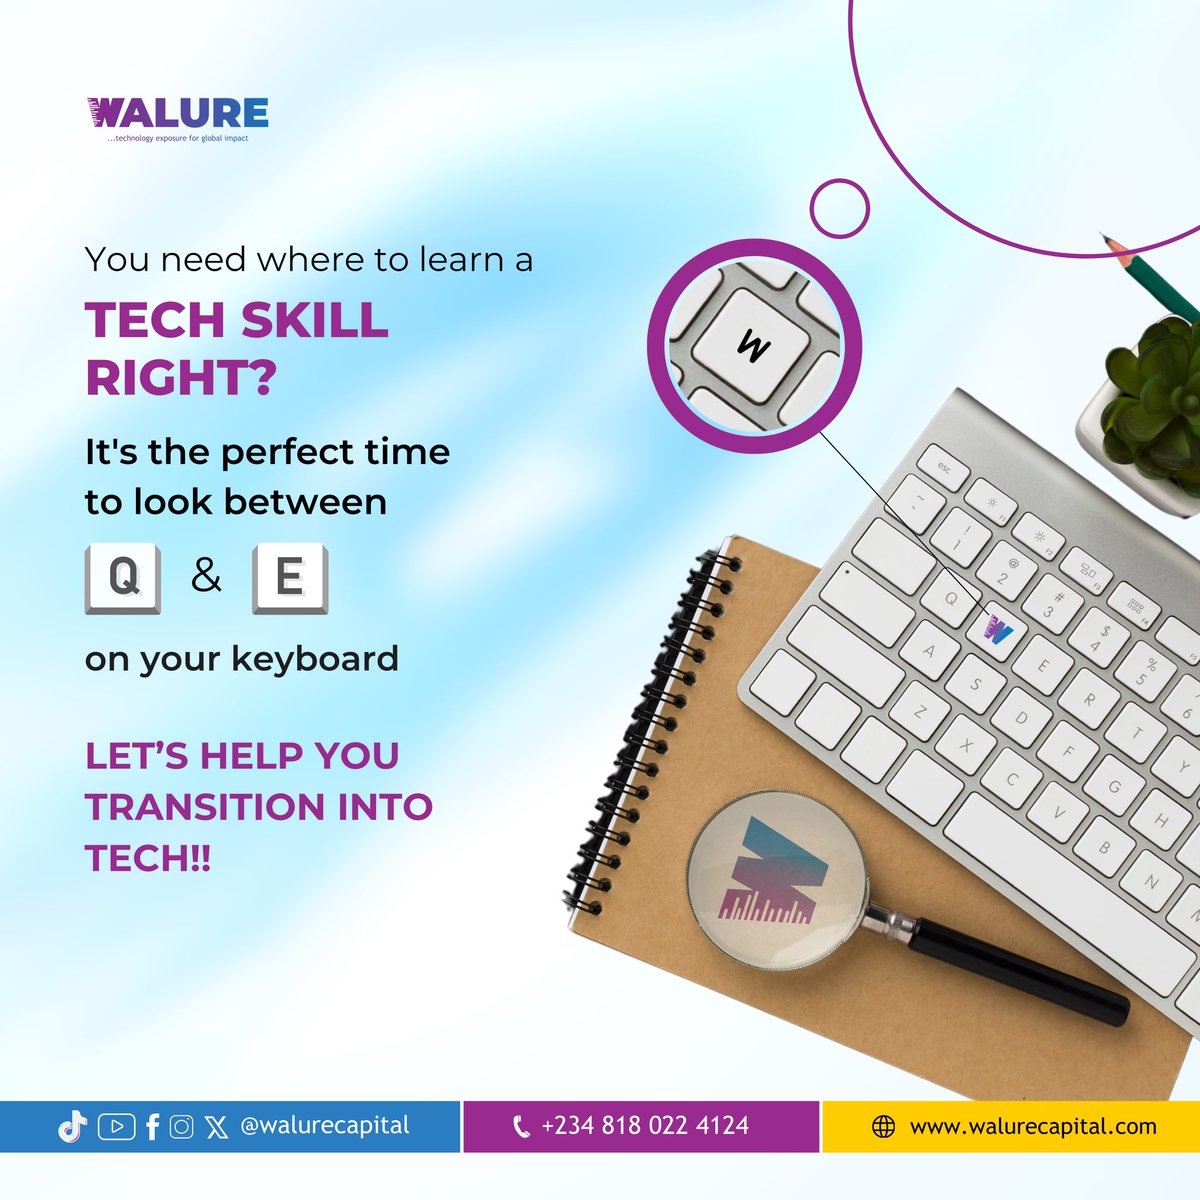 So you're looking for a way to get into tech, check the letter in between Q and E.

Click the link below to register for the next cohort starting June 22nd

walurecapital.com/courses/Course…

#walure
#walurecapital
#walureacademy